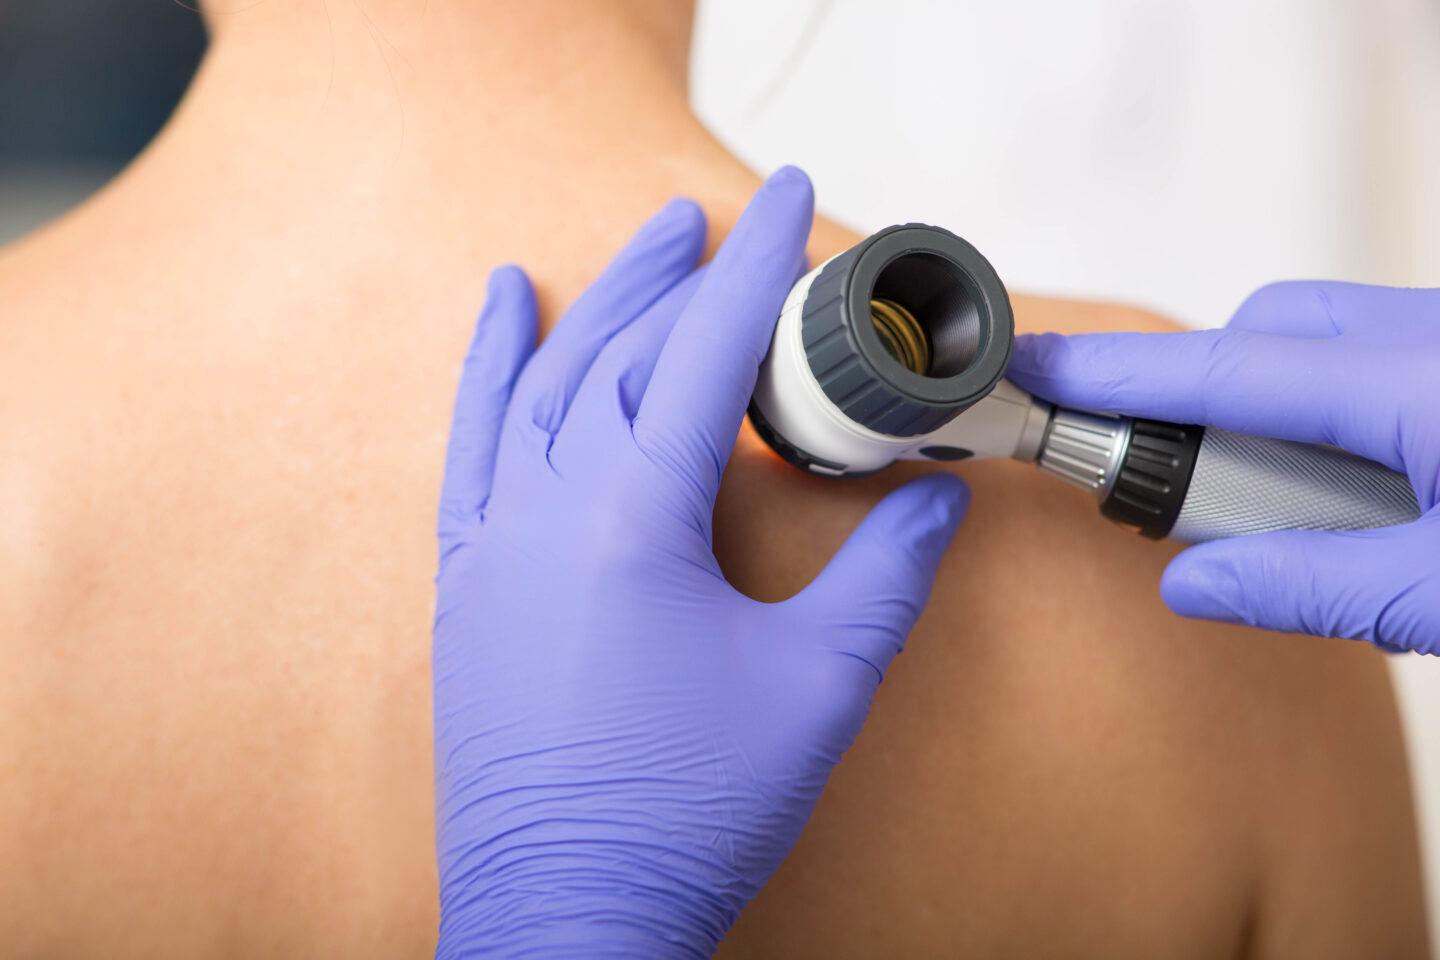 Healthcare professional examining patient's mole with a dermatoscope.